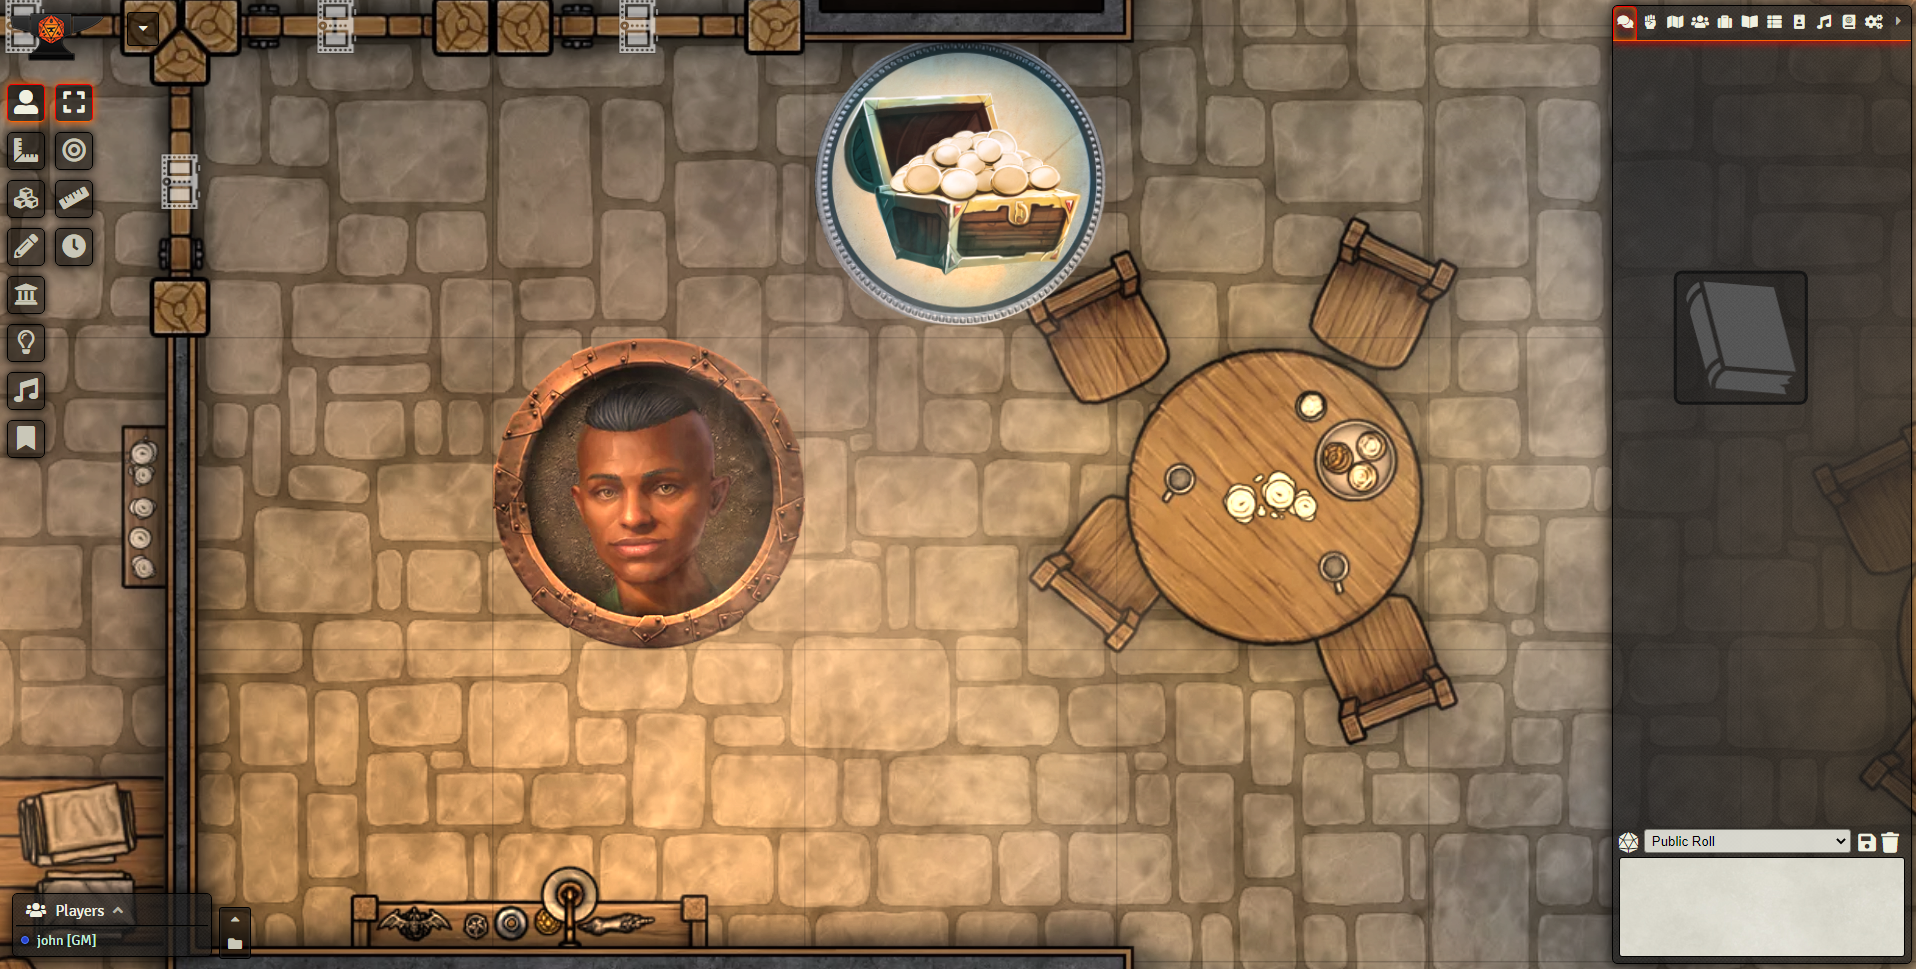 A screenshot showcasing an overhead battle map of a stone-floored room with a table and chairs, including a tokens for a smiling young man.